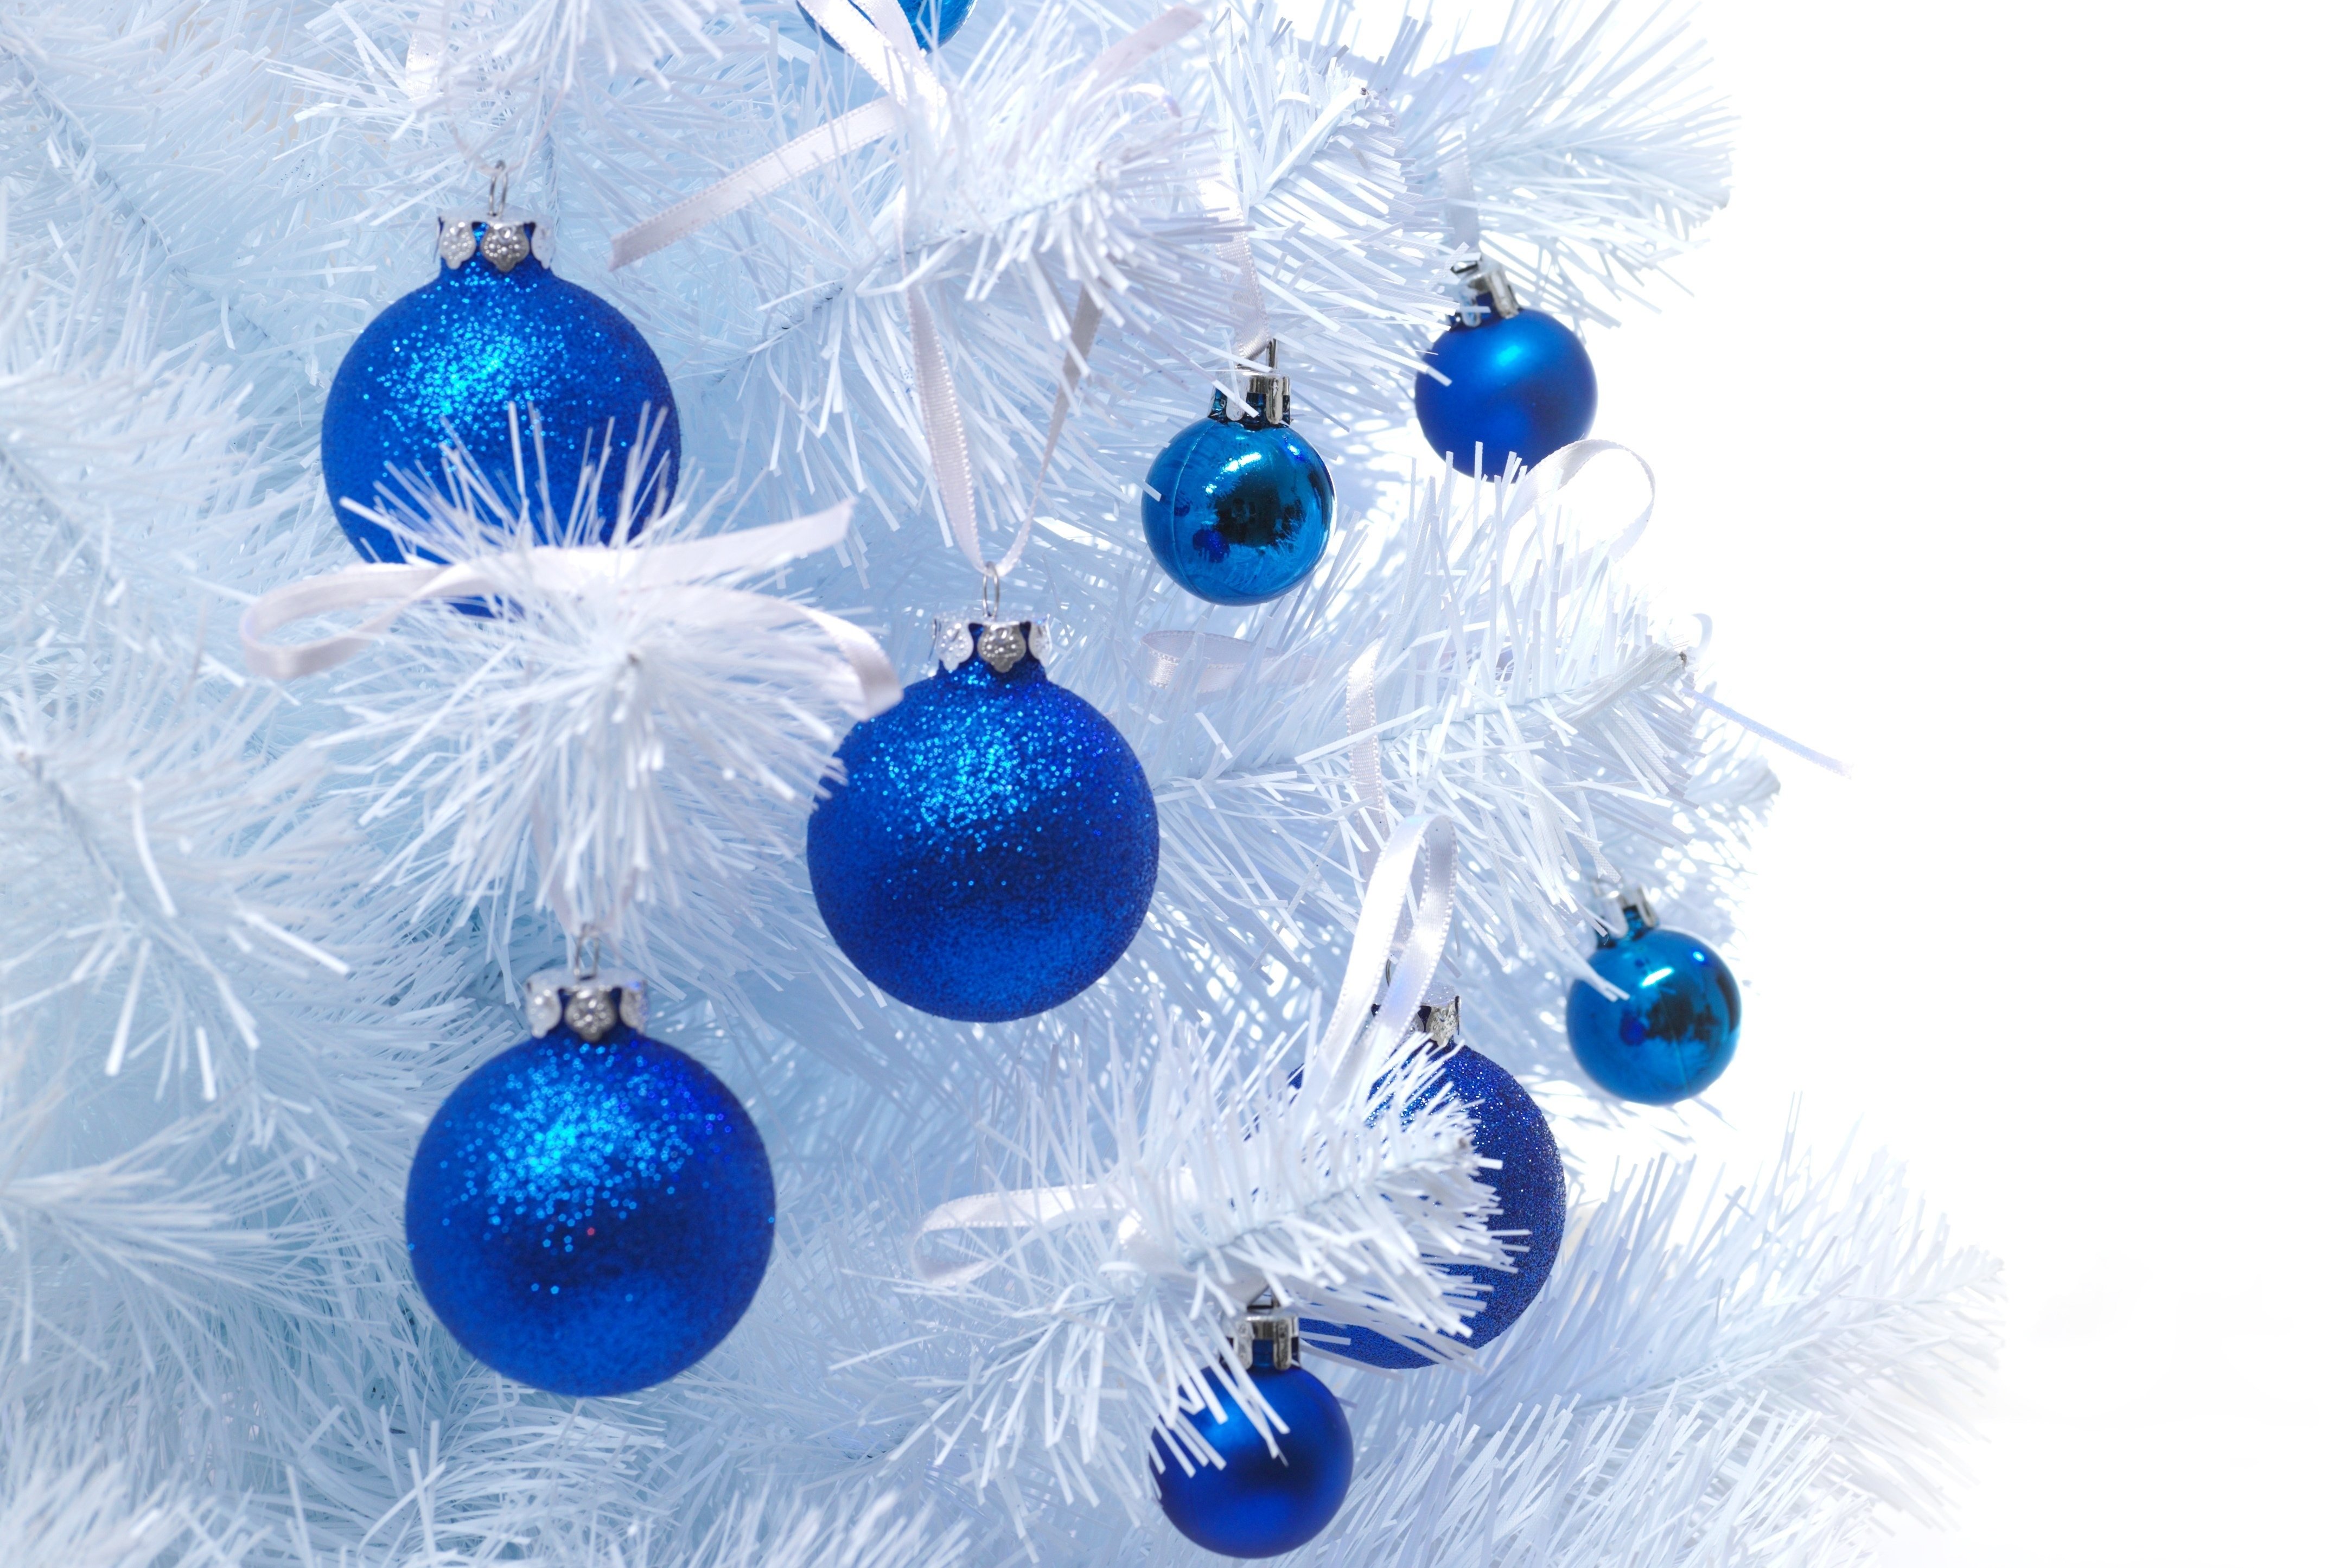 Free download Christmas Ornaments 4k Ultra HD Wallpaper Background Image [4289x2890] for your Desktop, Mobile & Tablet. Explore Blue And White Christmas Tree Wallpaper. Blue Christmas Tree Wallpaper, White